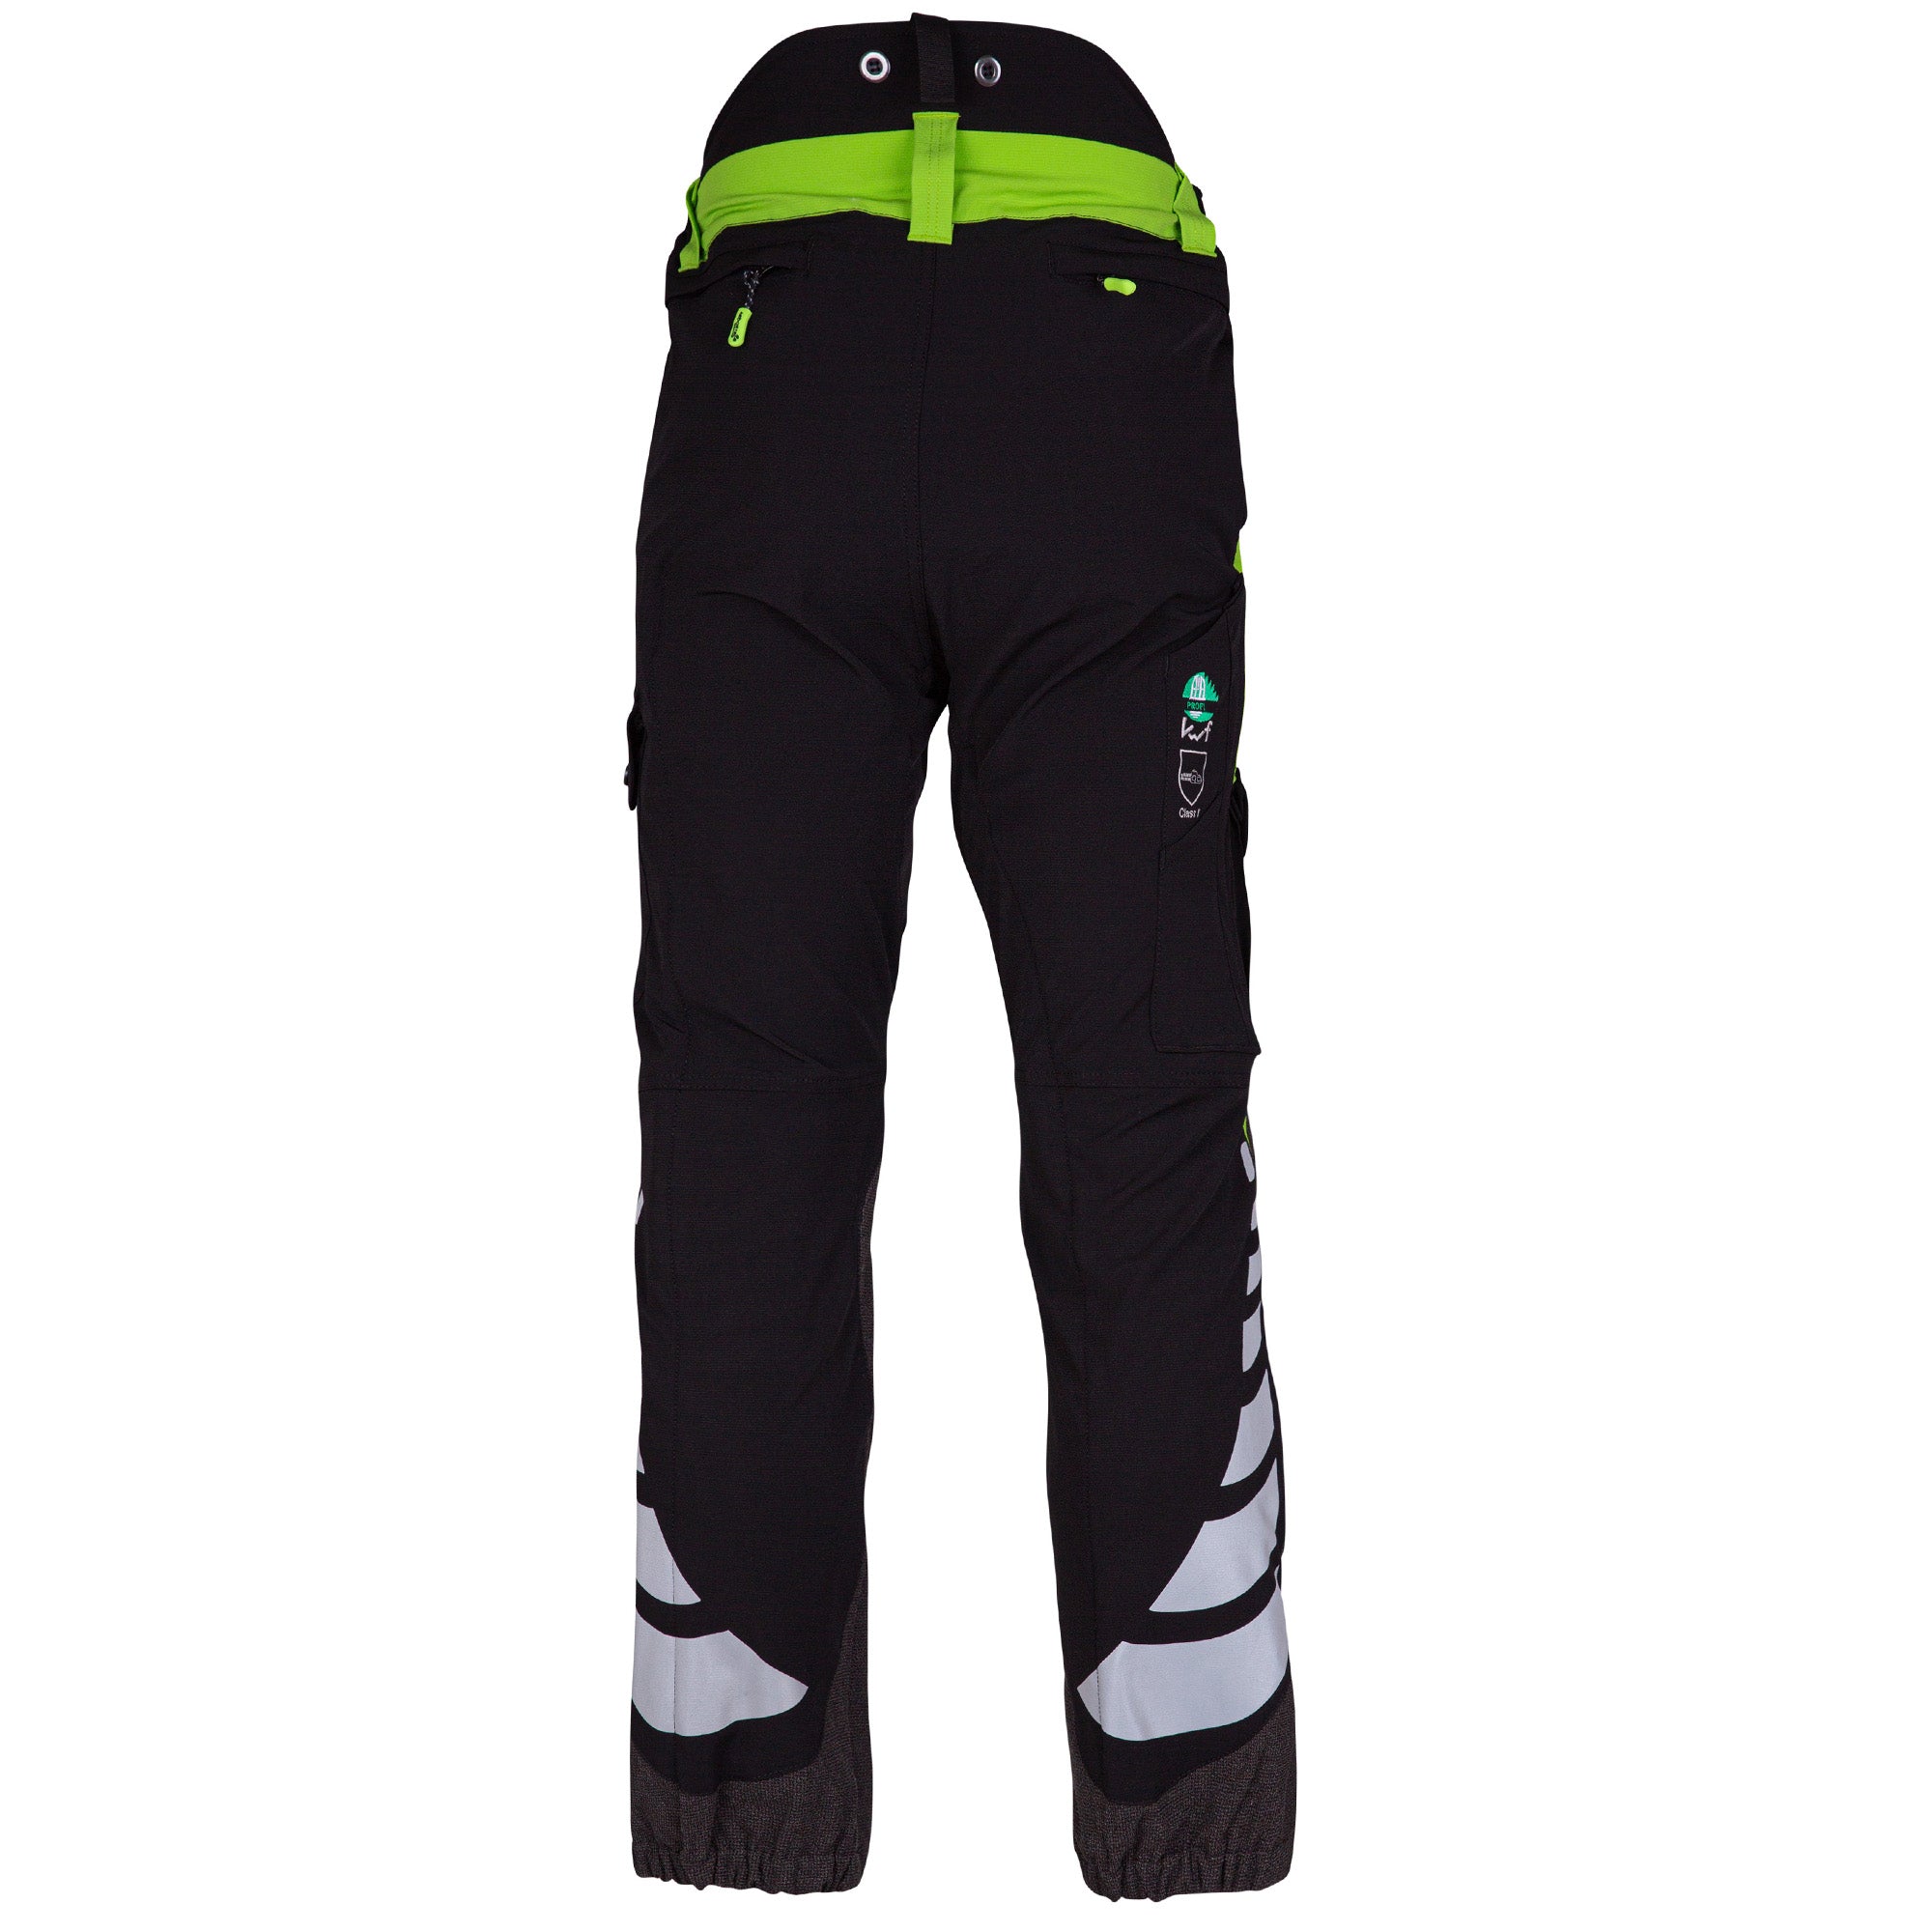 AT4010 Breatheflex Chainsaw Trousers Design A Class 1 - Lime.